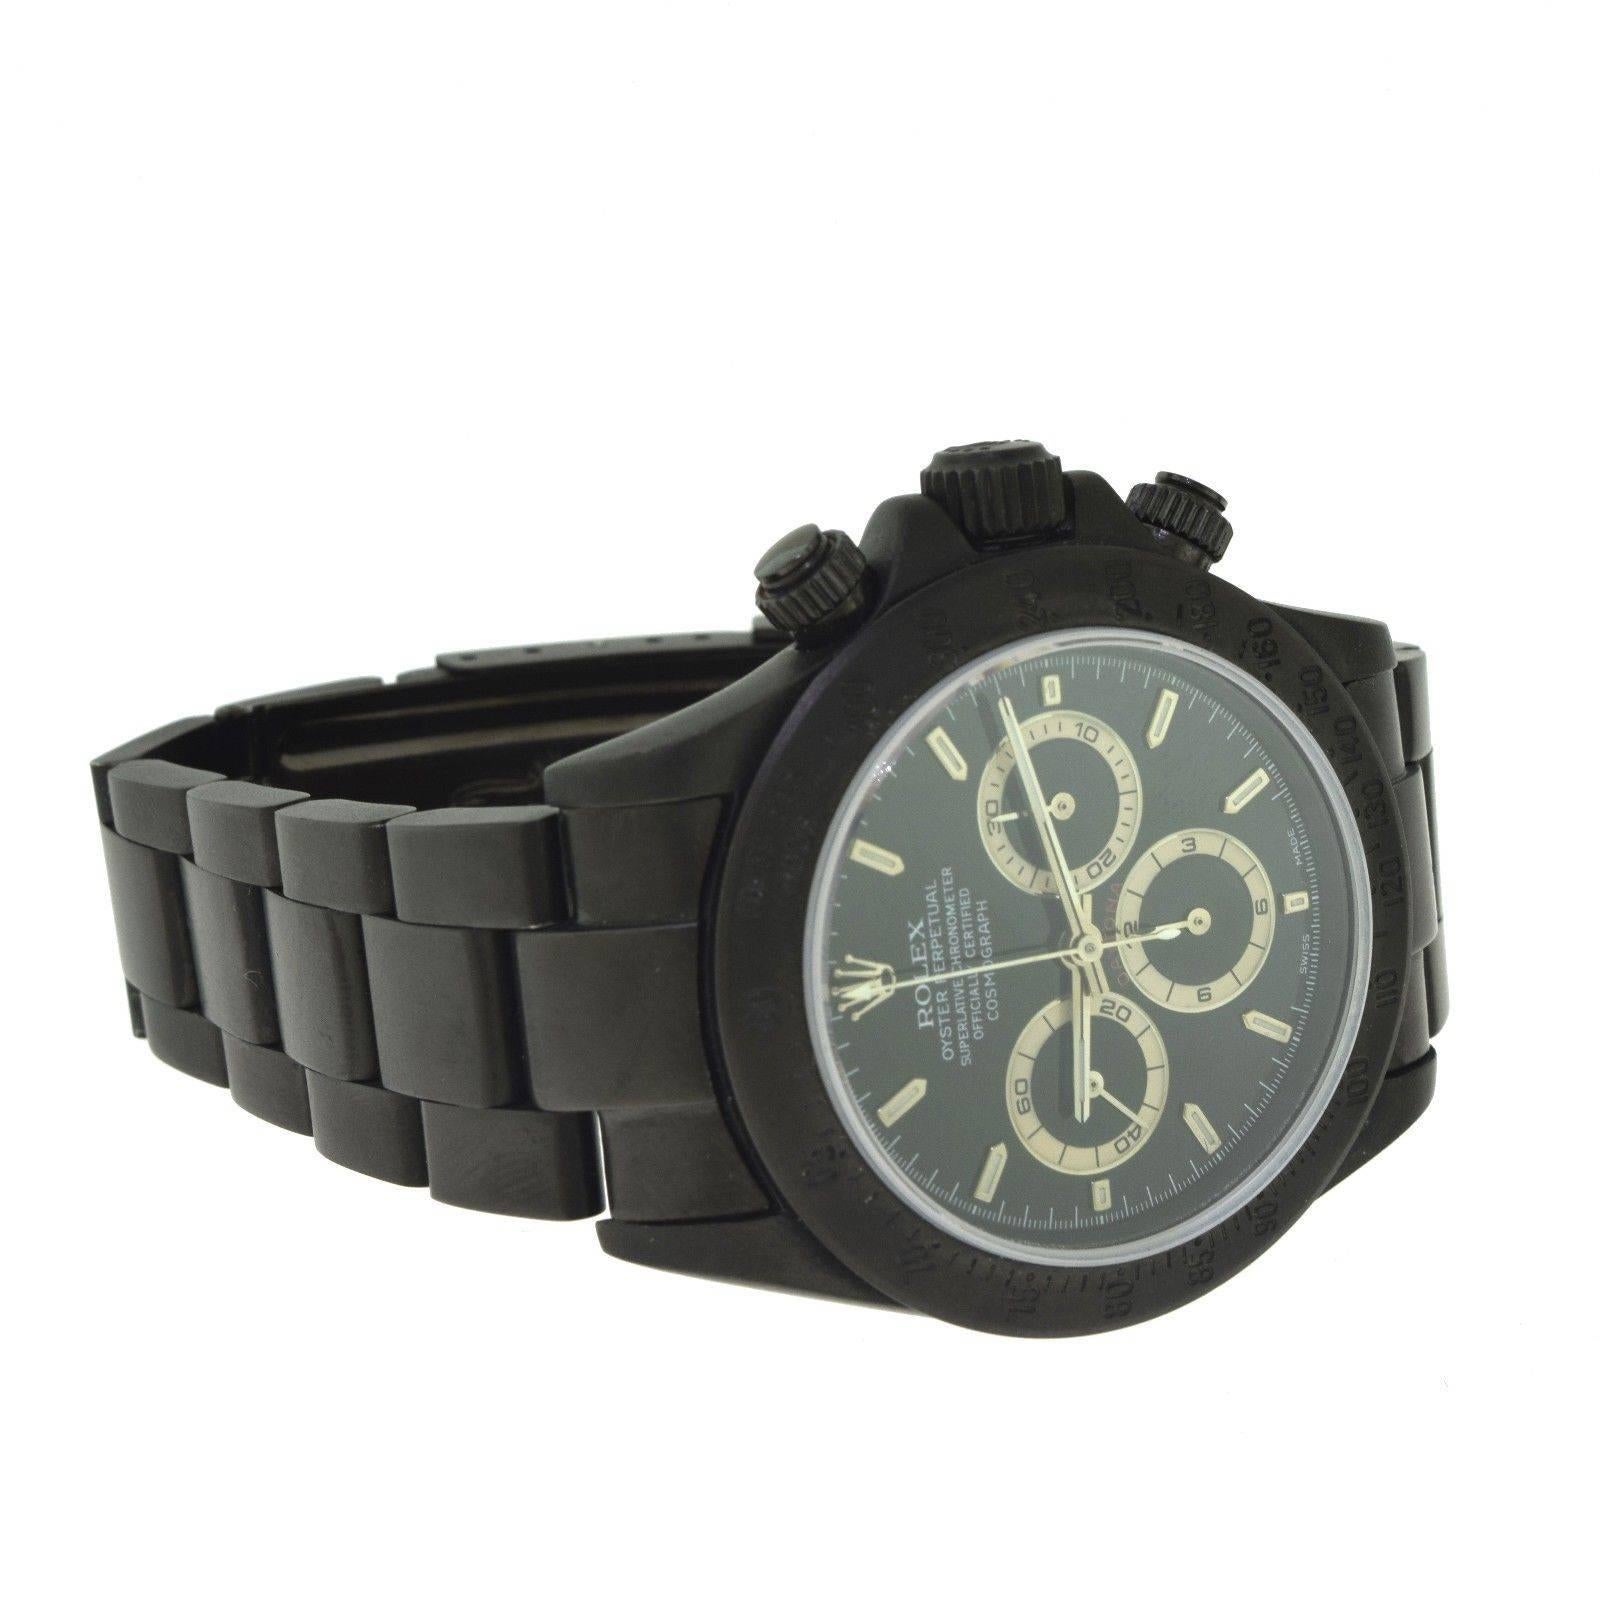 This is a Bamford Watch Department custom black out Daytona. A gorgeous Rolex watch. The Rolex Daytona is the most iconic sports watch ever. It is instantly recognizable, highly coveted, extremely liquid and best of all: extremely comfortable to